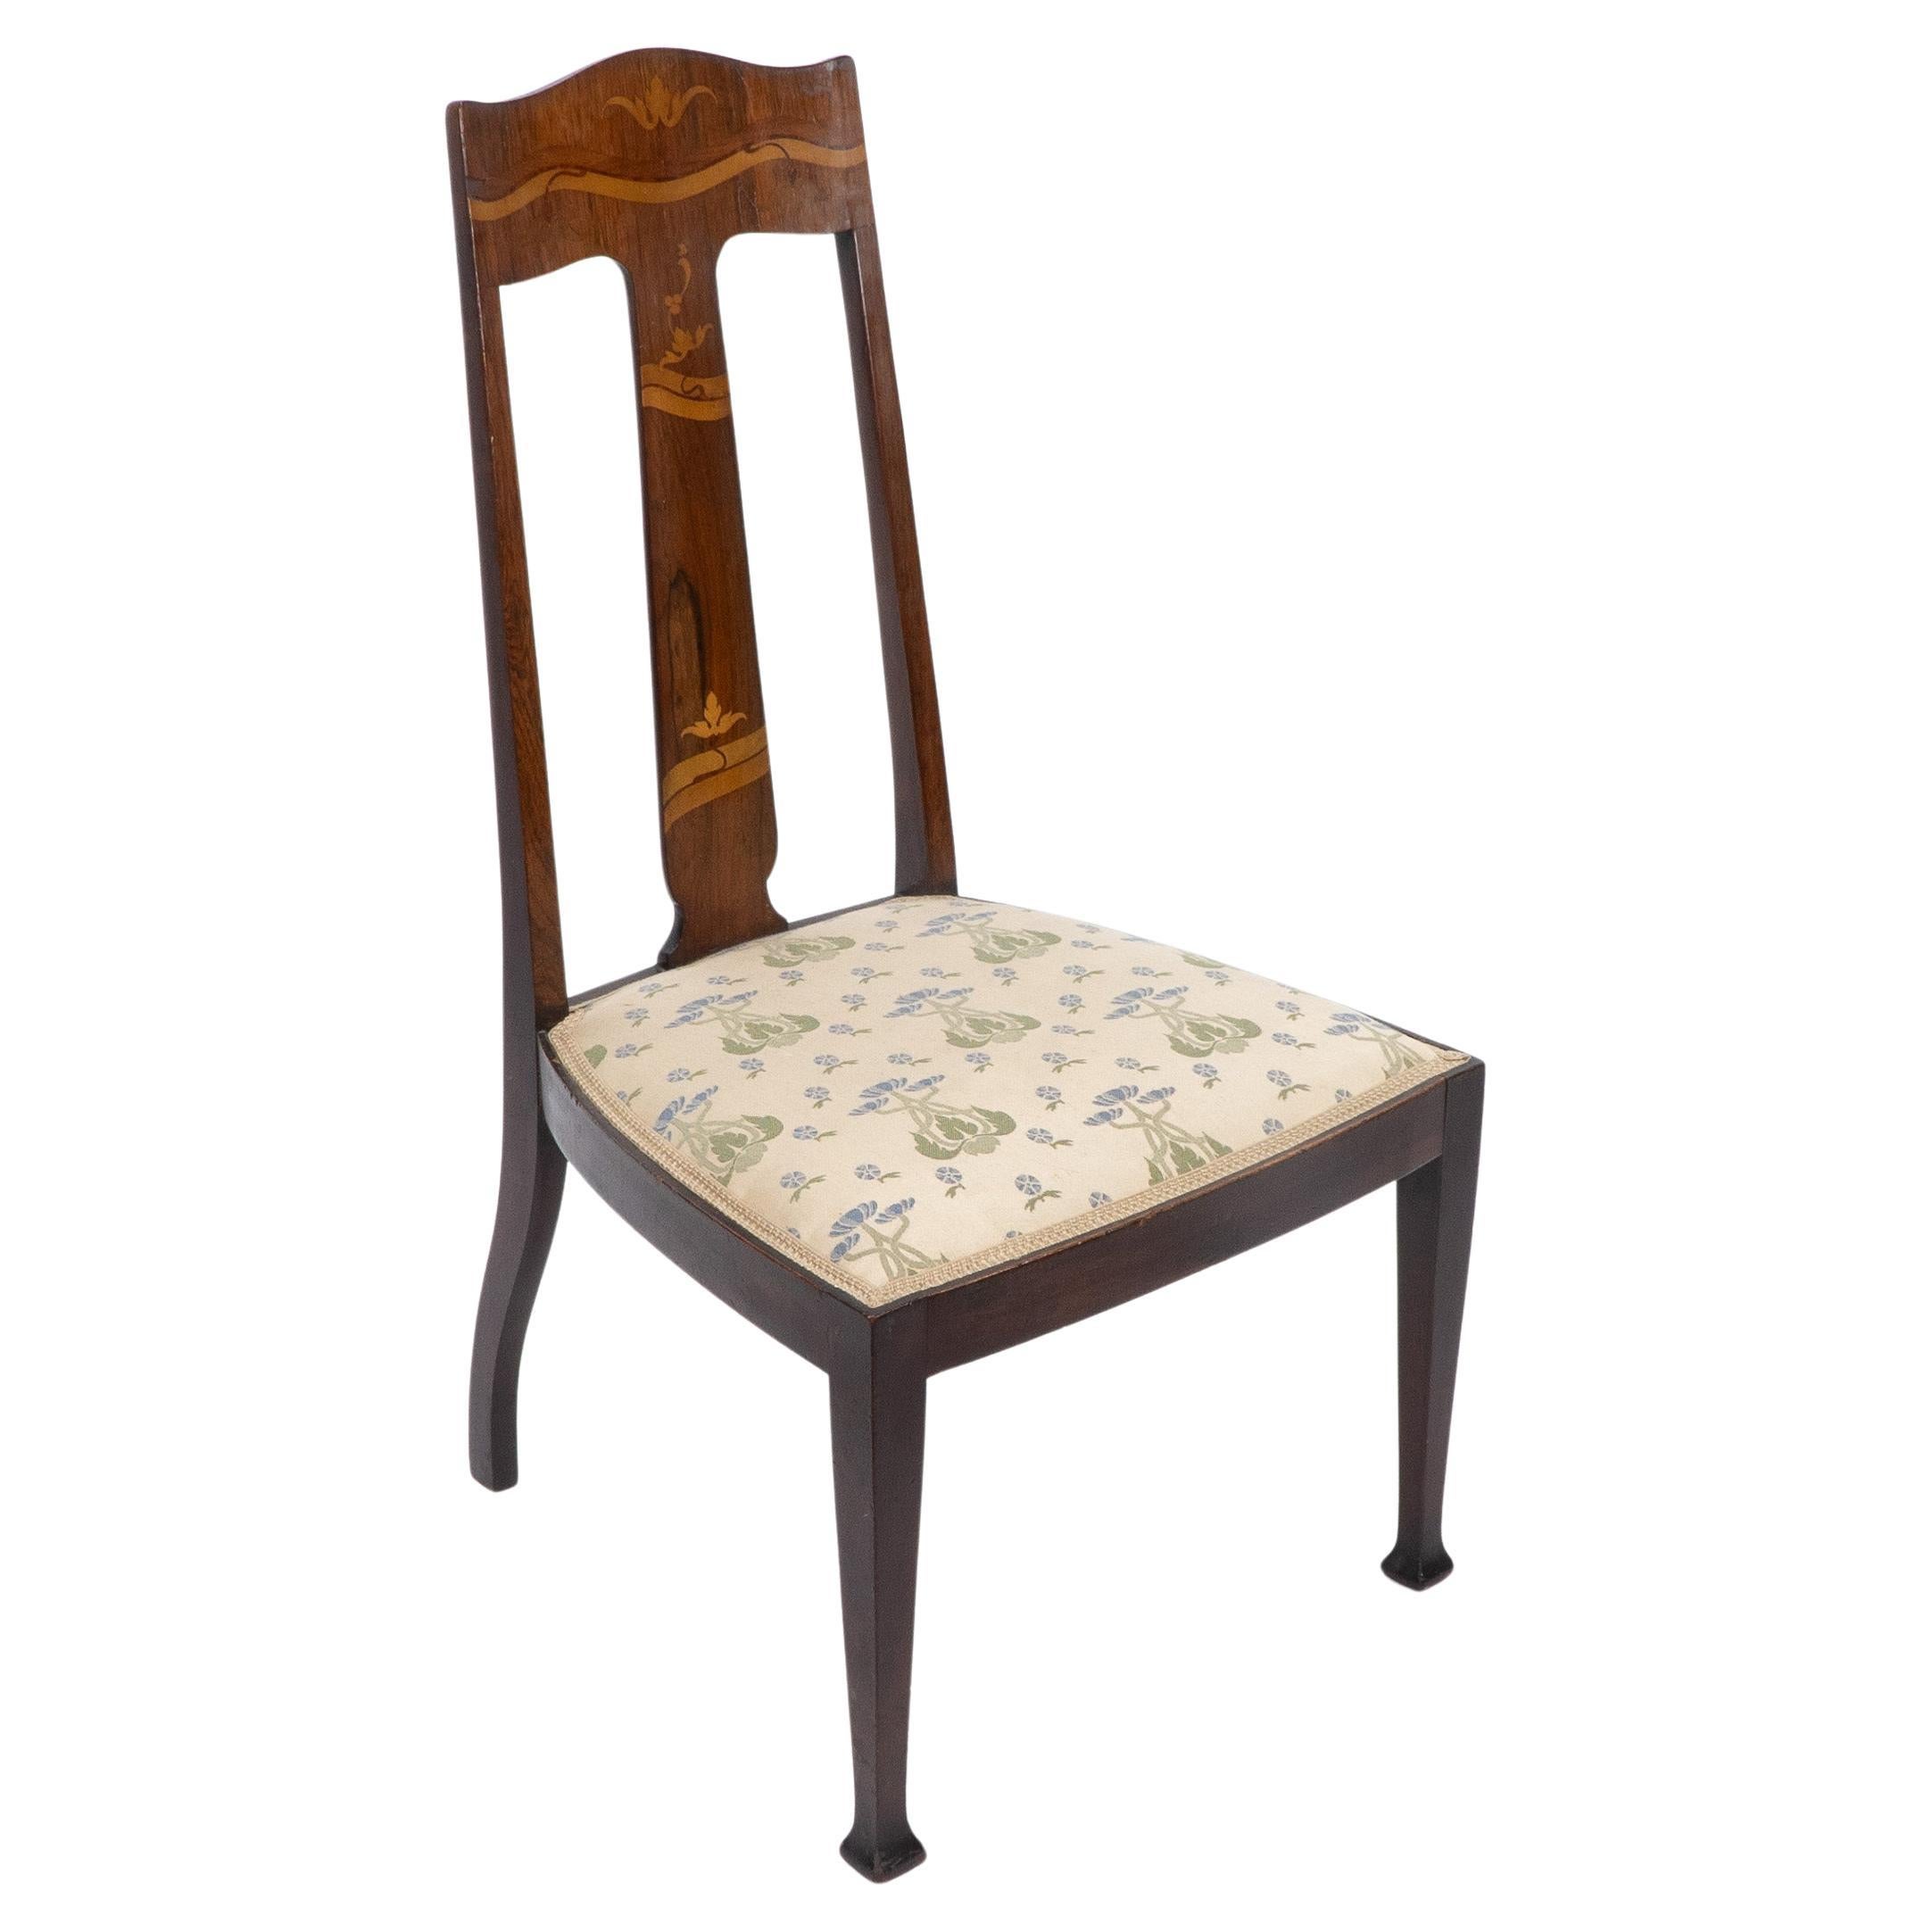 Jas Shoolbred. Arts & Crafts Mahogany Rosewood Chair With stylized Floral Inlay